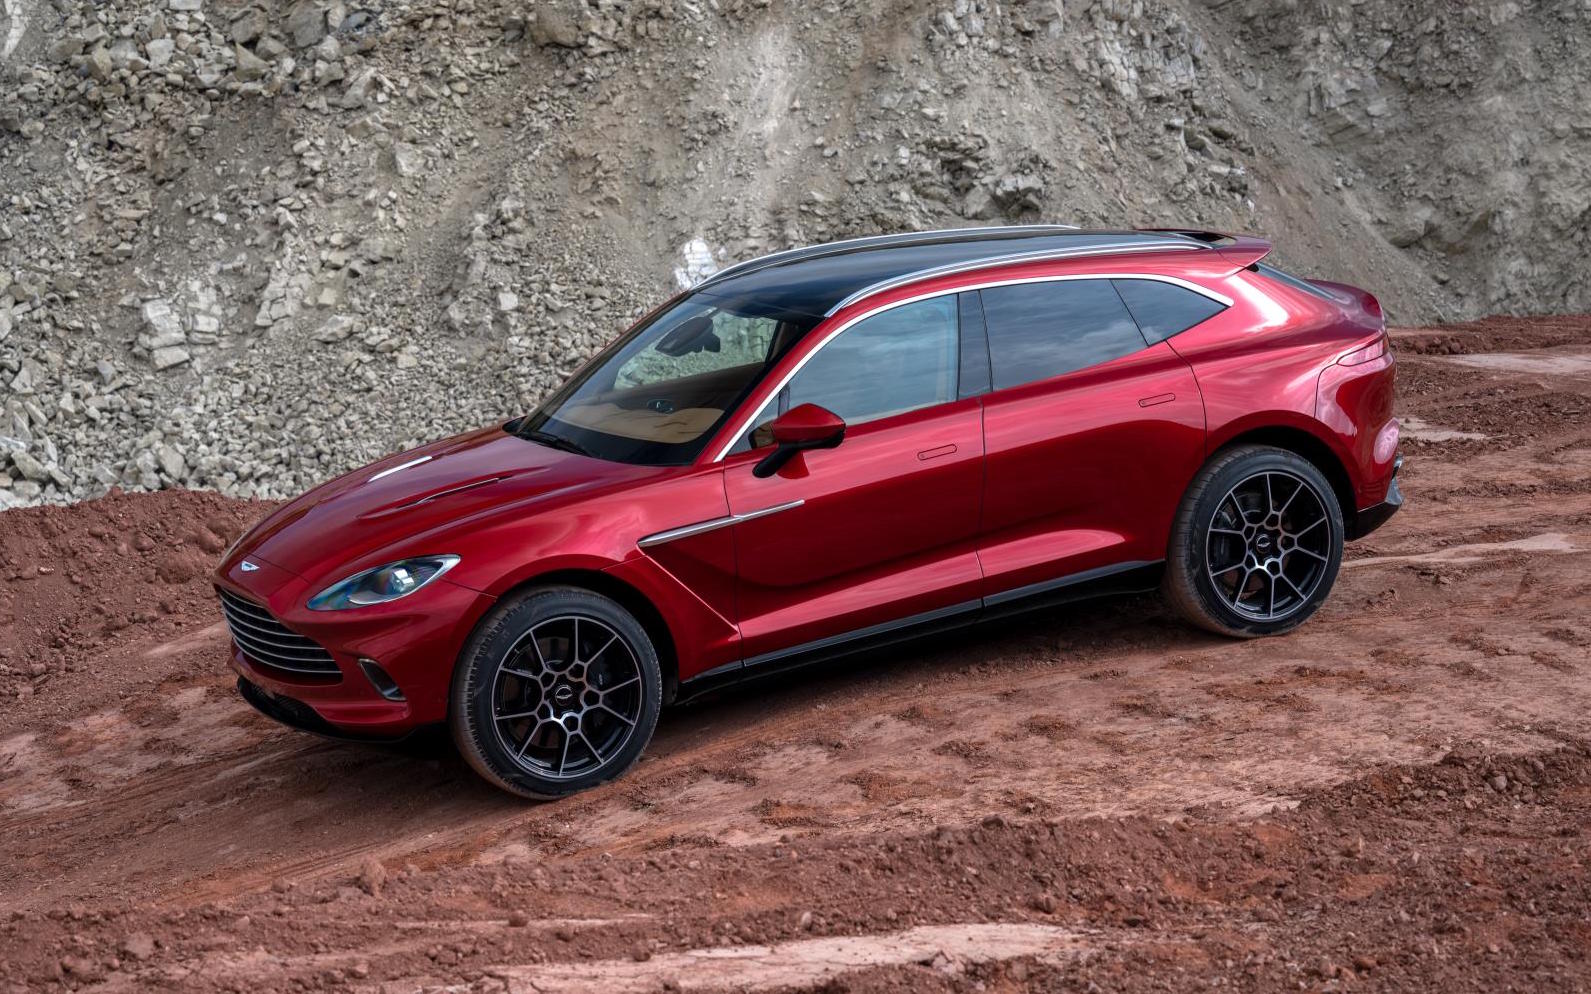 Aston Martin DBX officially revealed as new super SUV